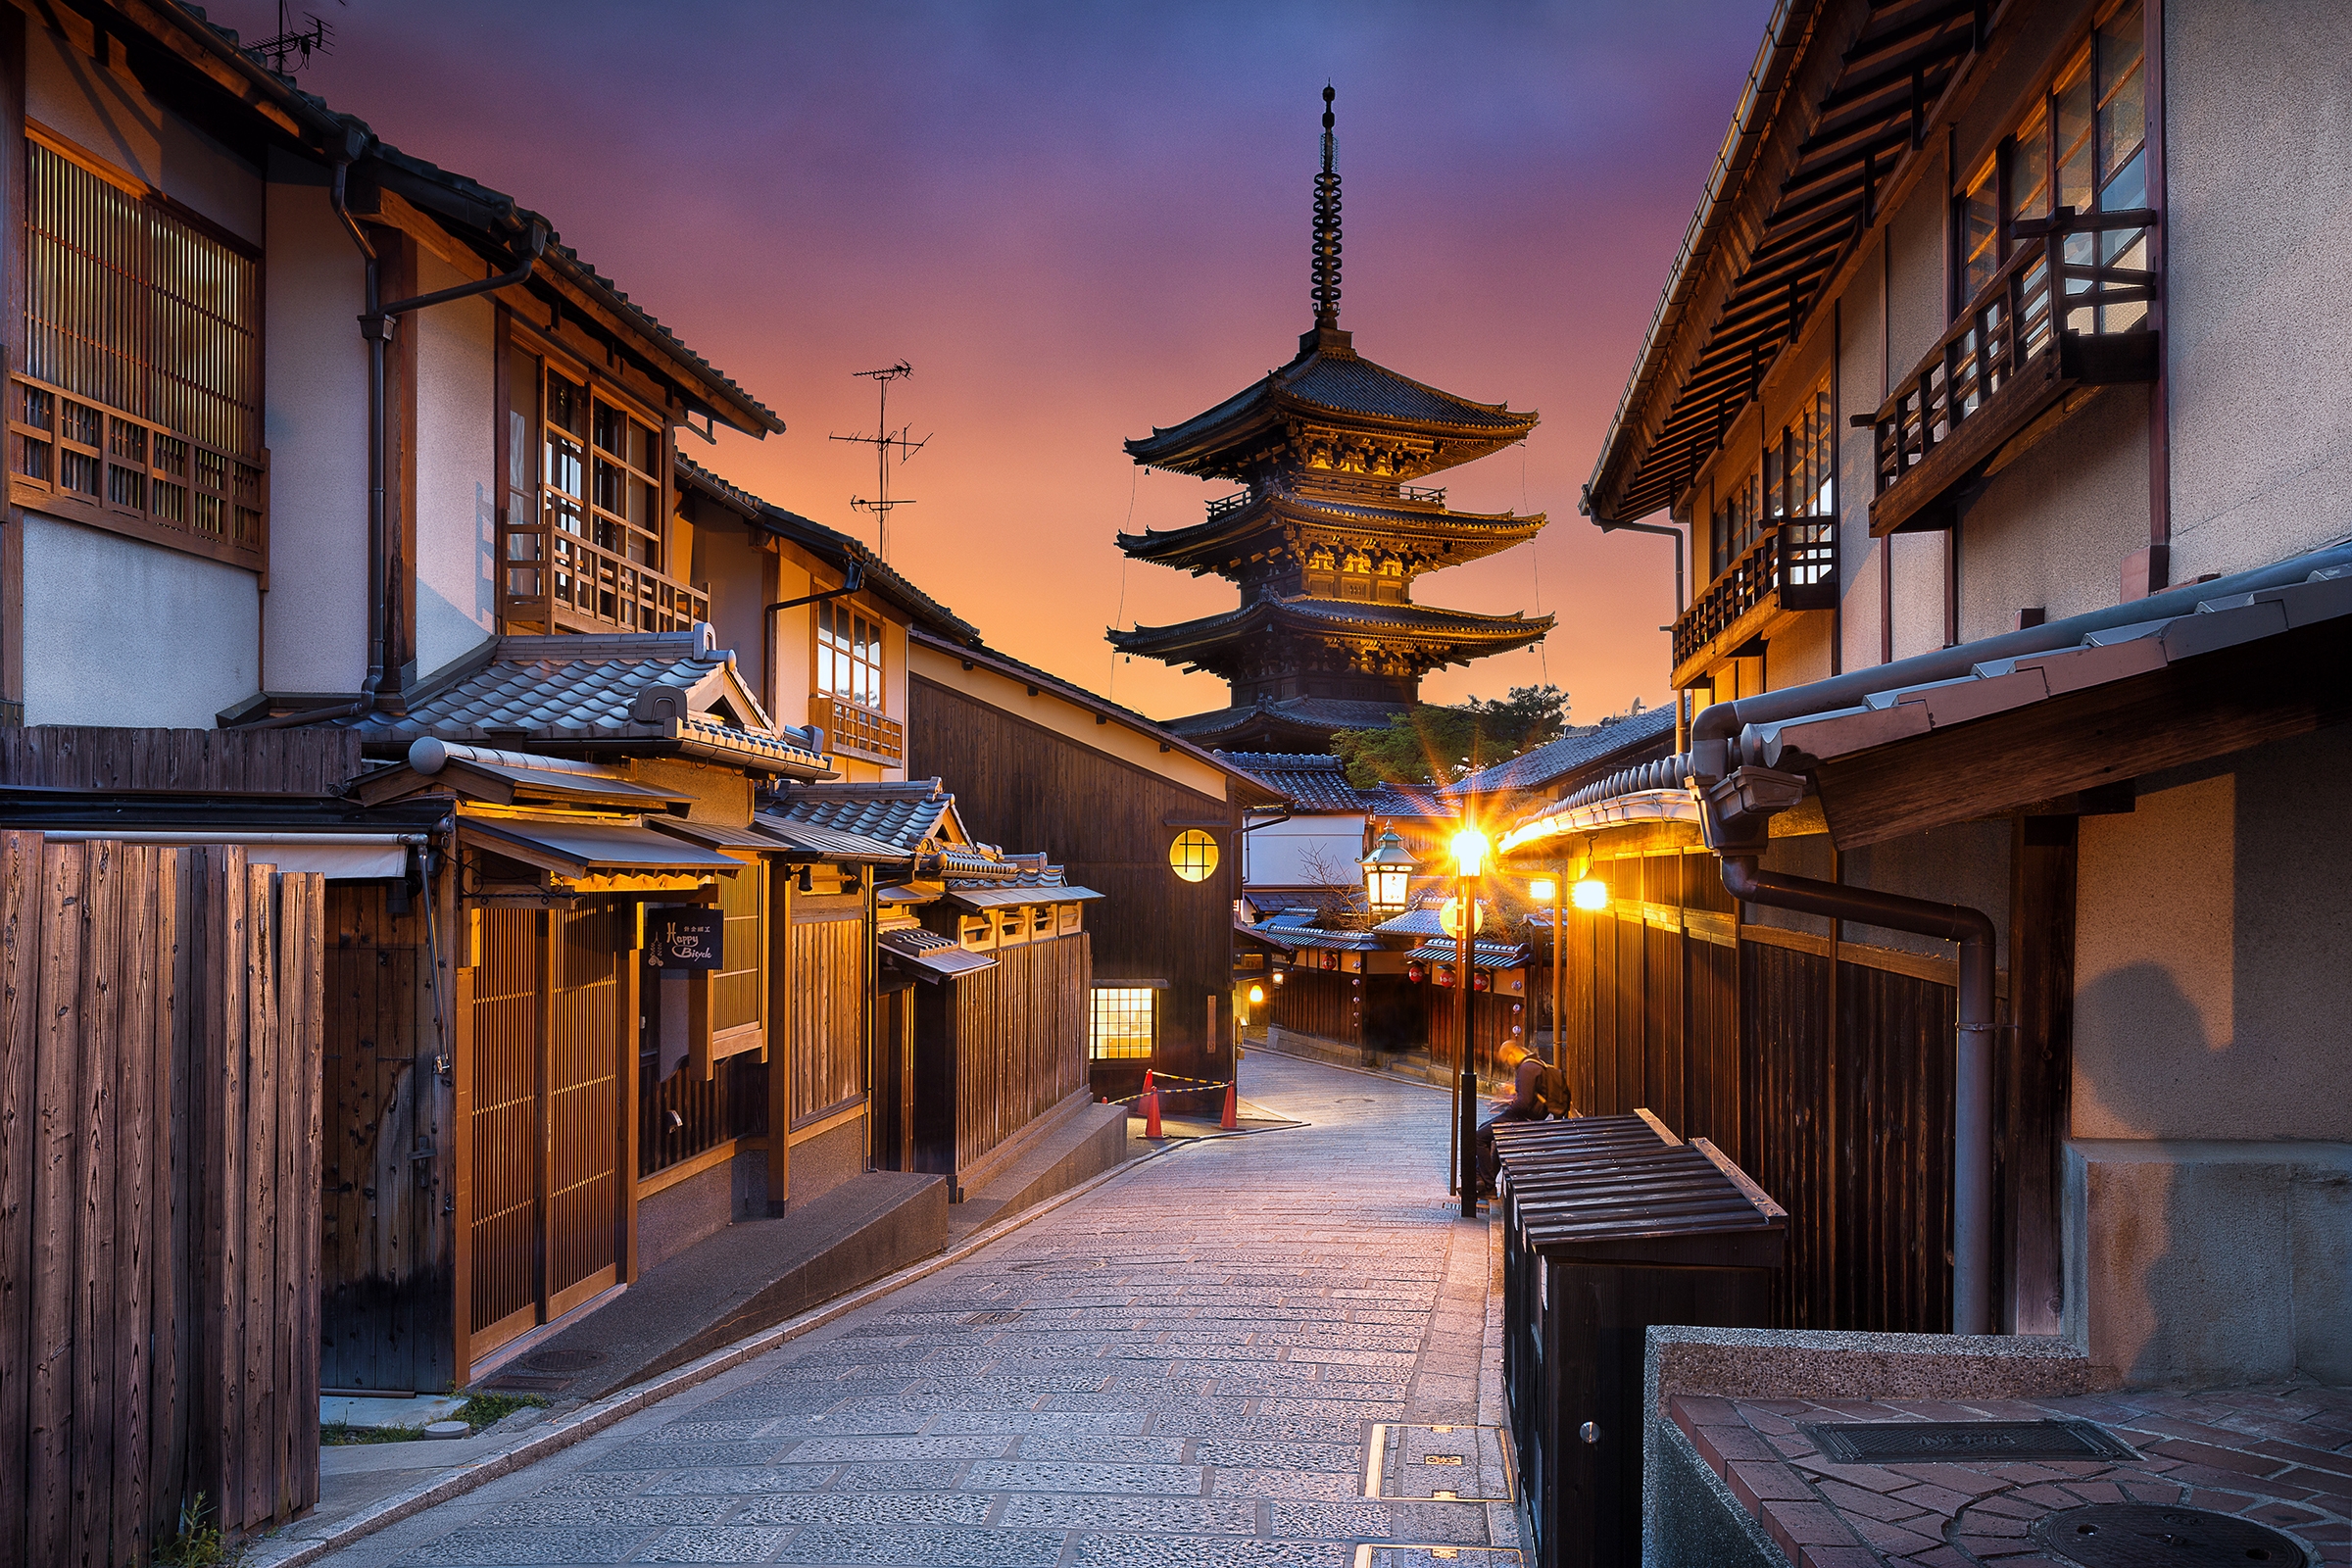 The soul of Kyoto